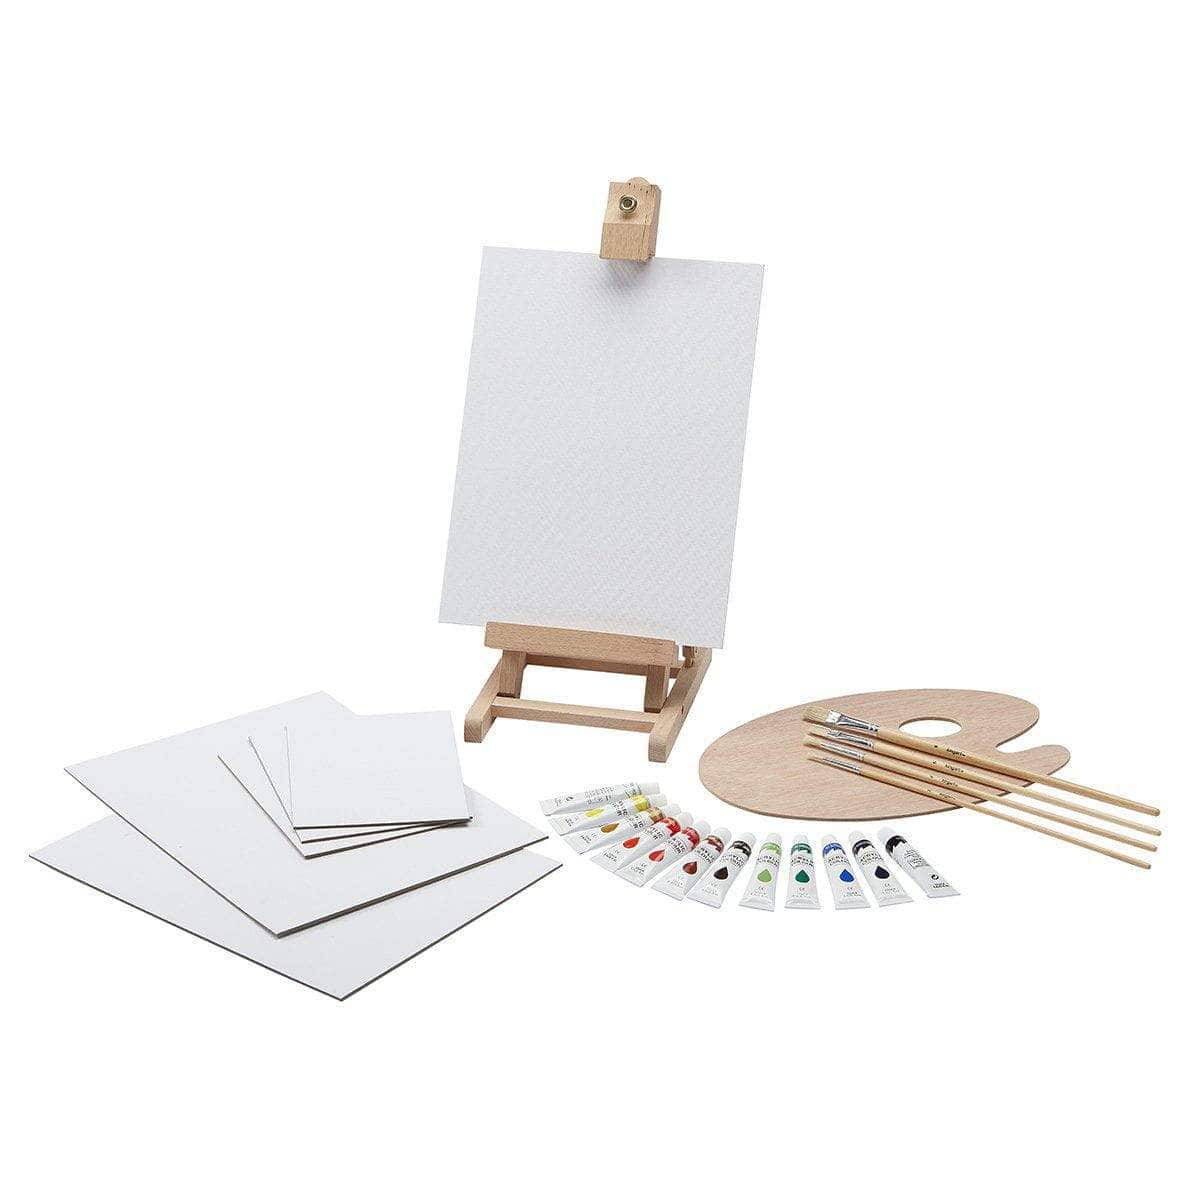  Acrylic Paint Set with Wooden Easel, 3 Canvas Panels